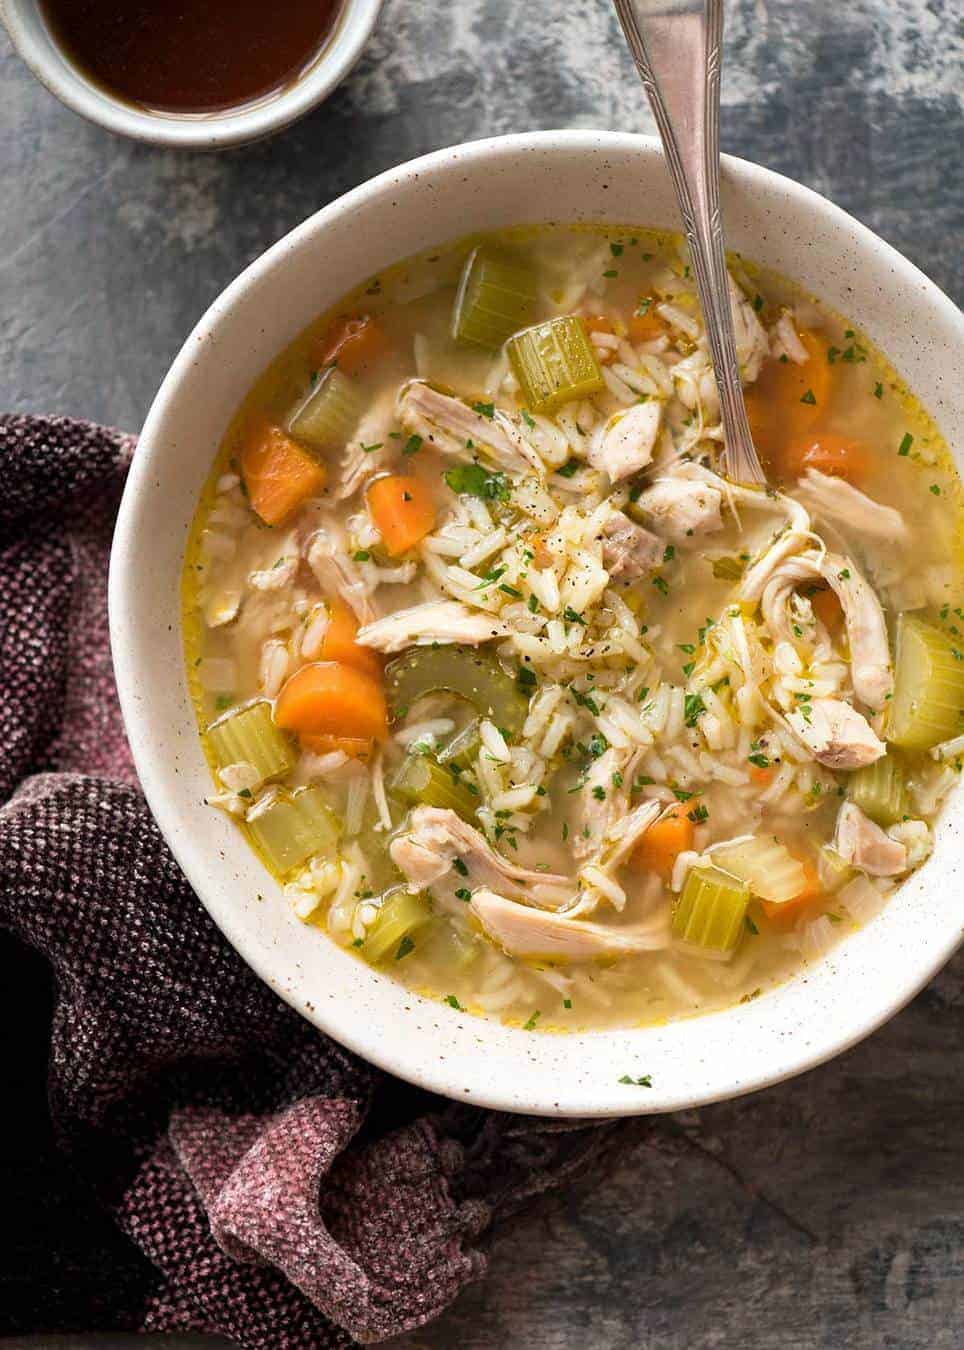 https://www.recipetineats.com/wp-content/uploads/2018/04/Chicken-and-Rice-Soup_7.jpg